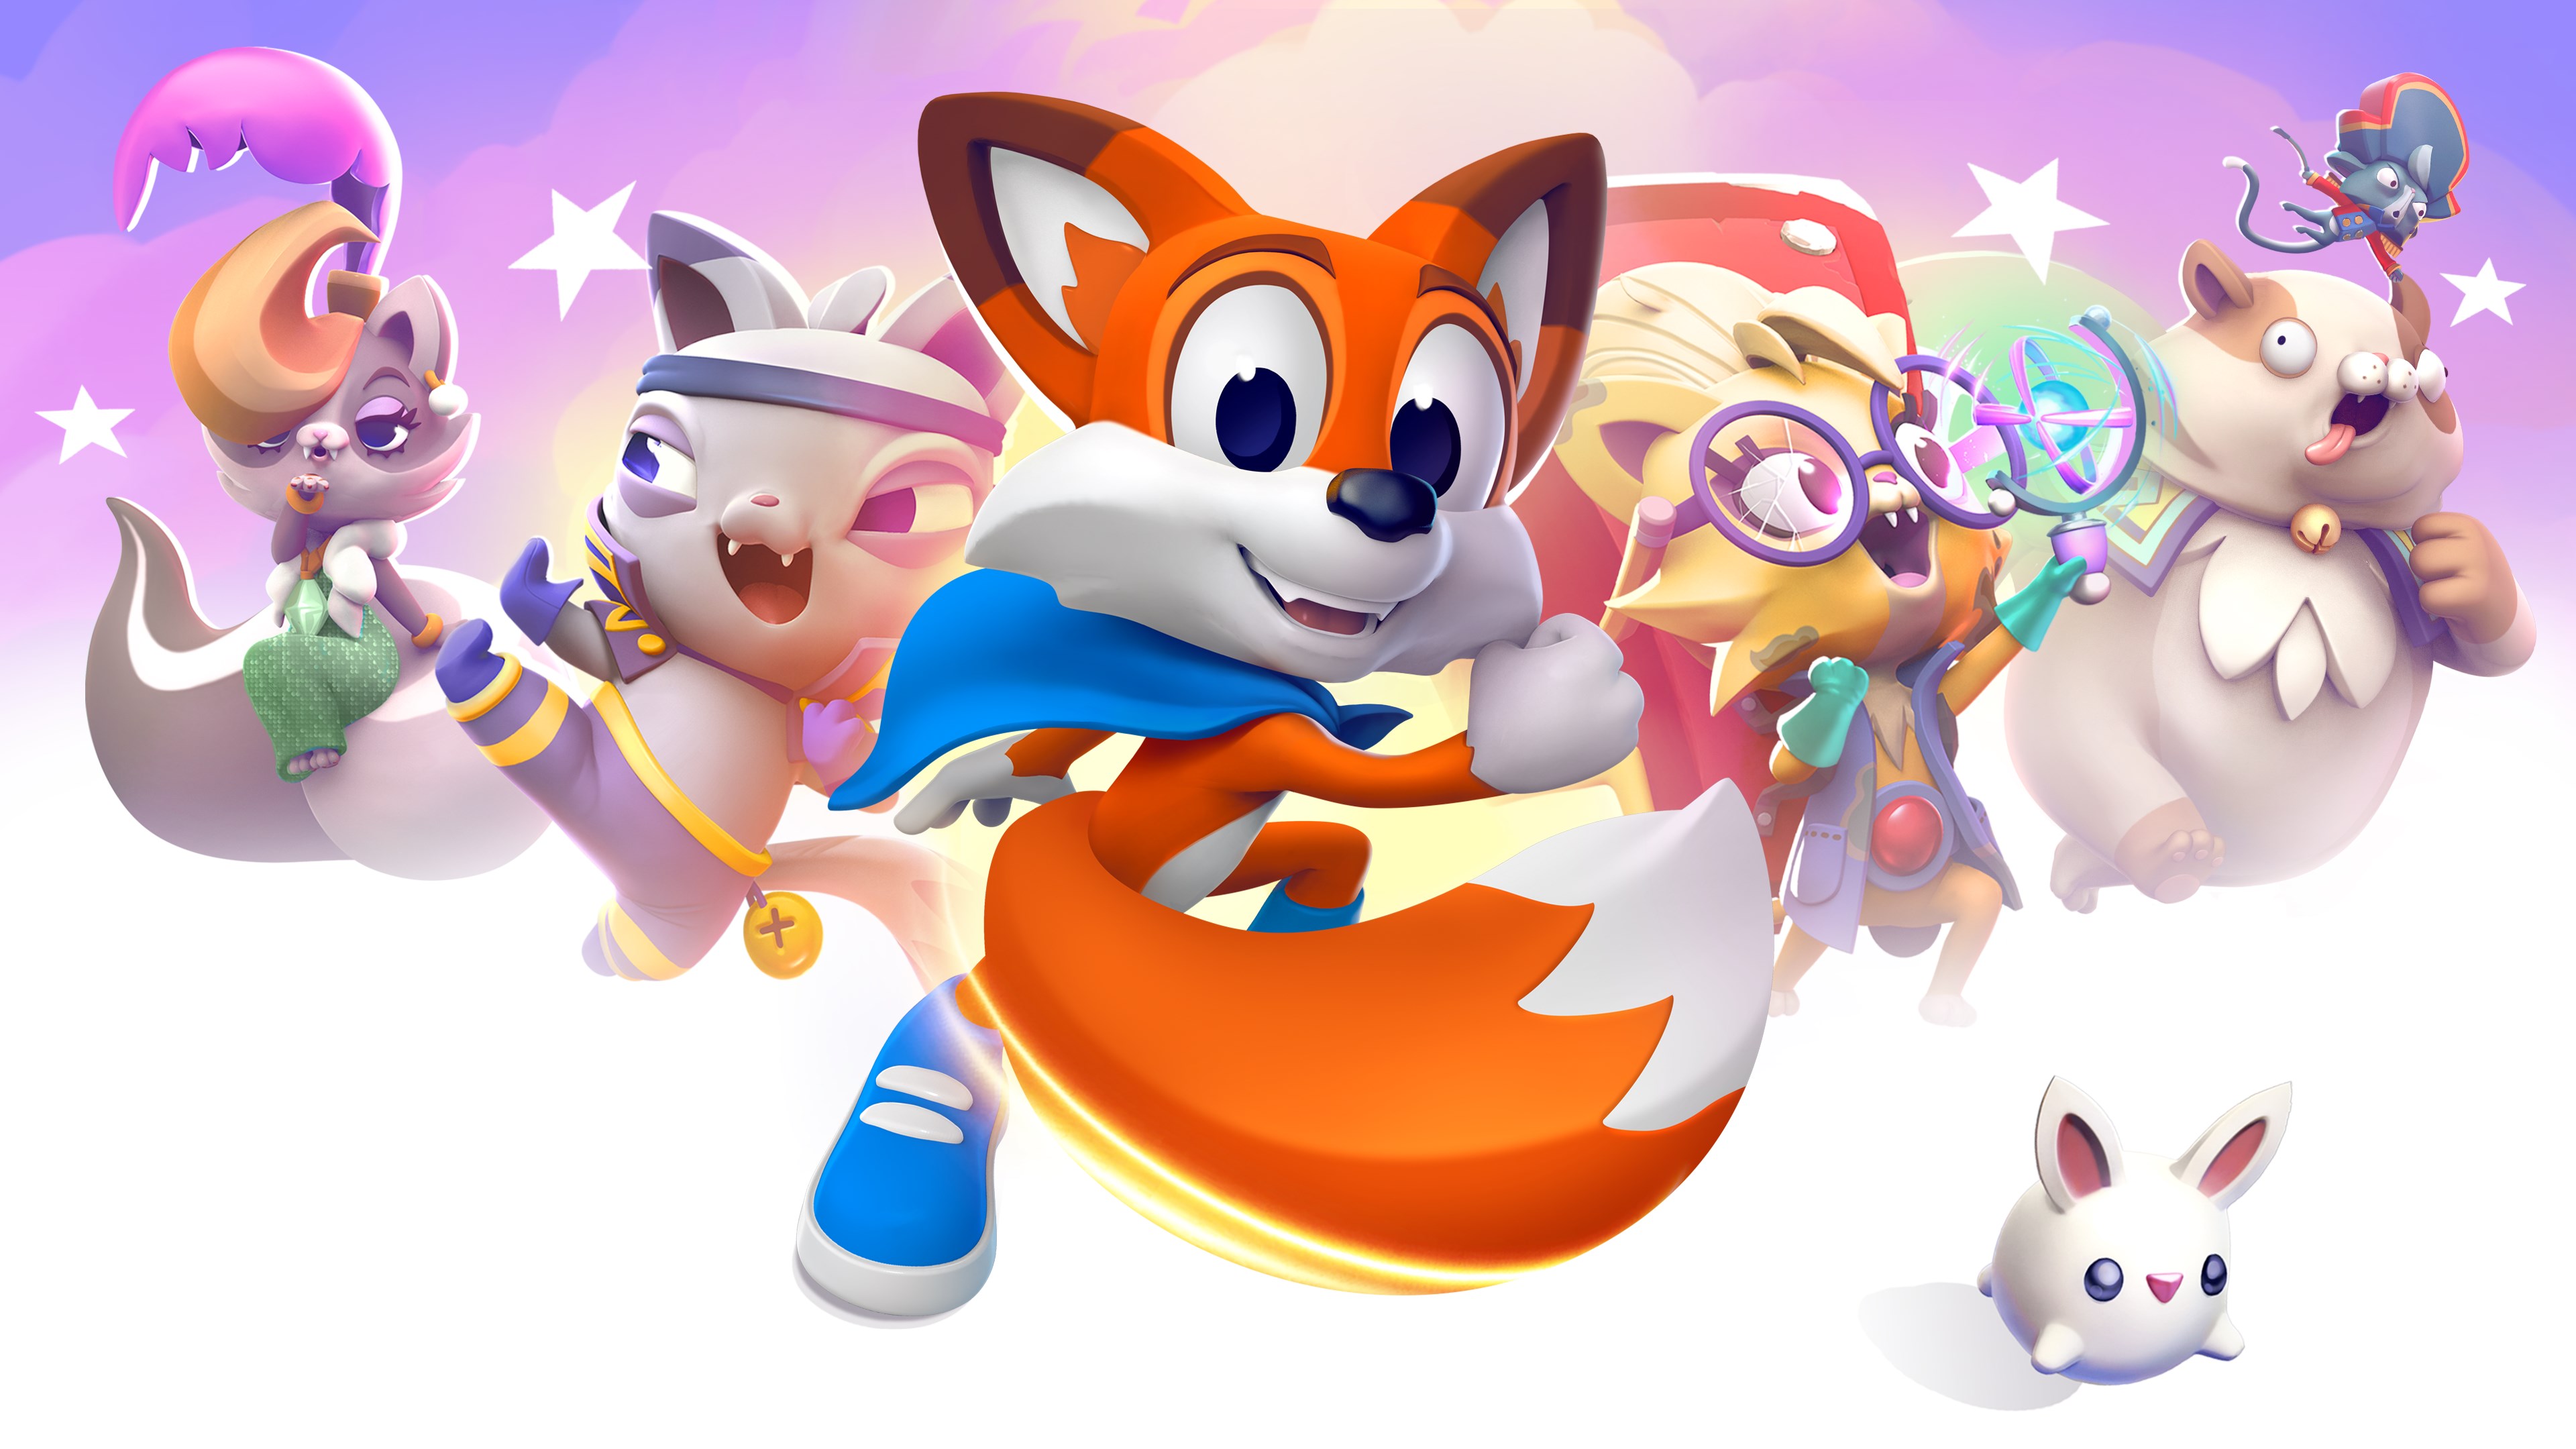 New lucky tale. Игра super Lucky's Tale. New super Lucky's Tale [ps4]. New super Lucky's Tale Xbox. Super Lucky's Tale Xbox one.